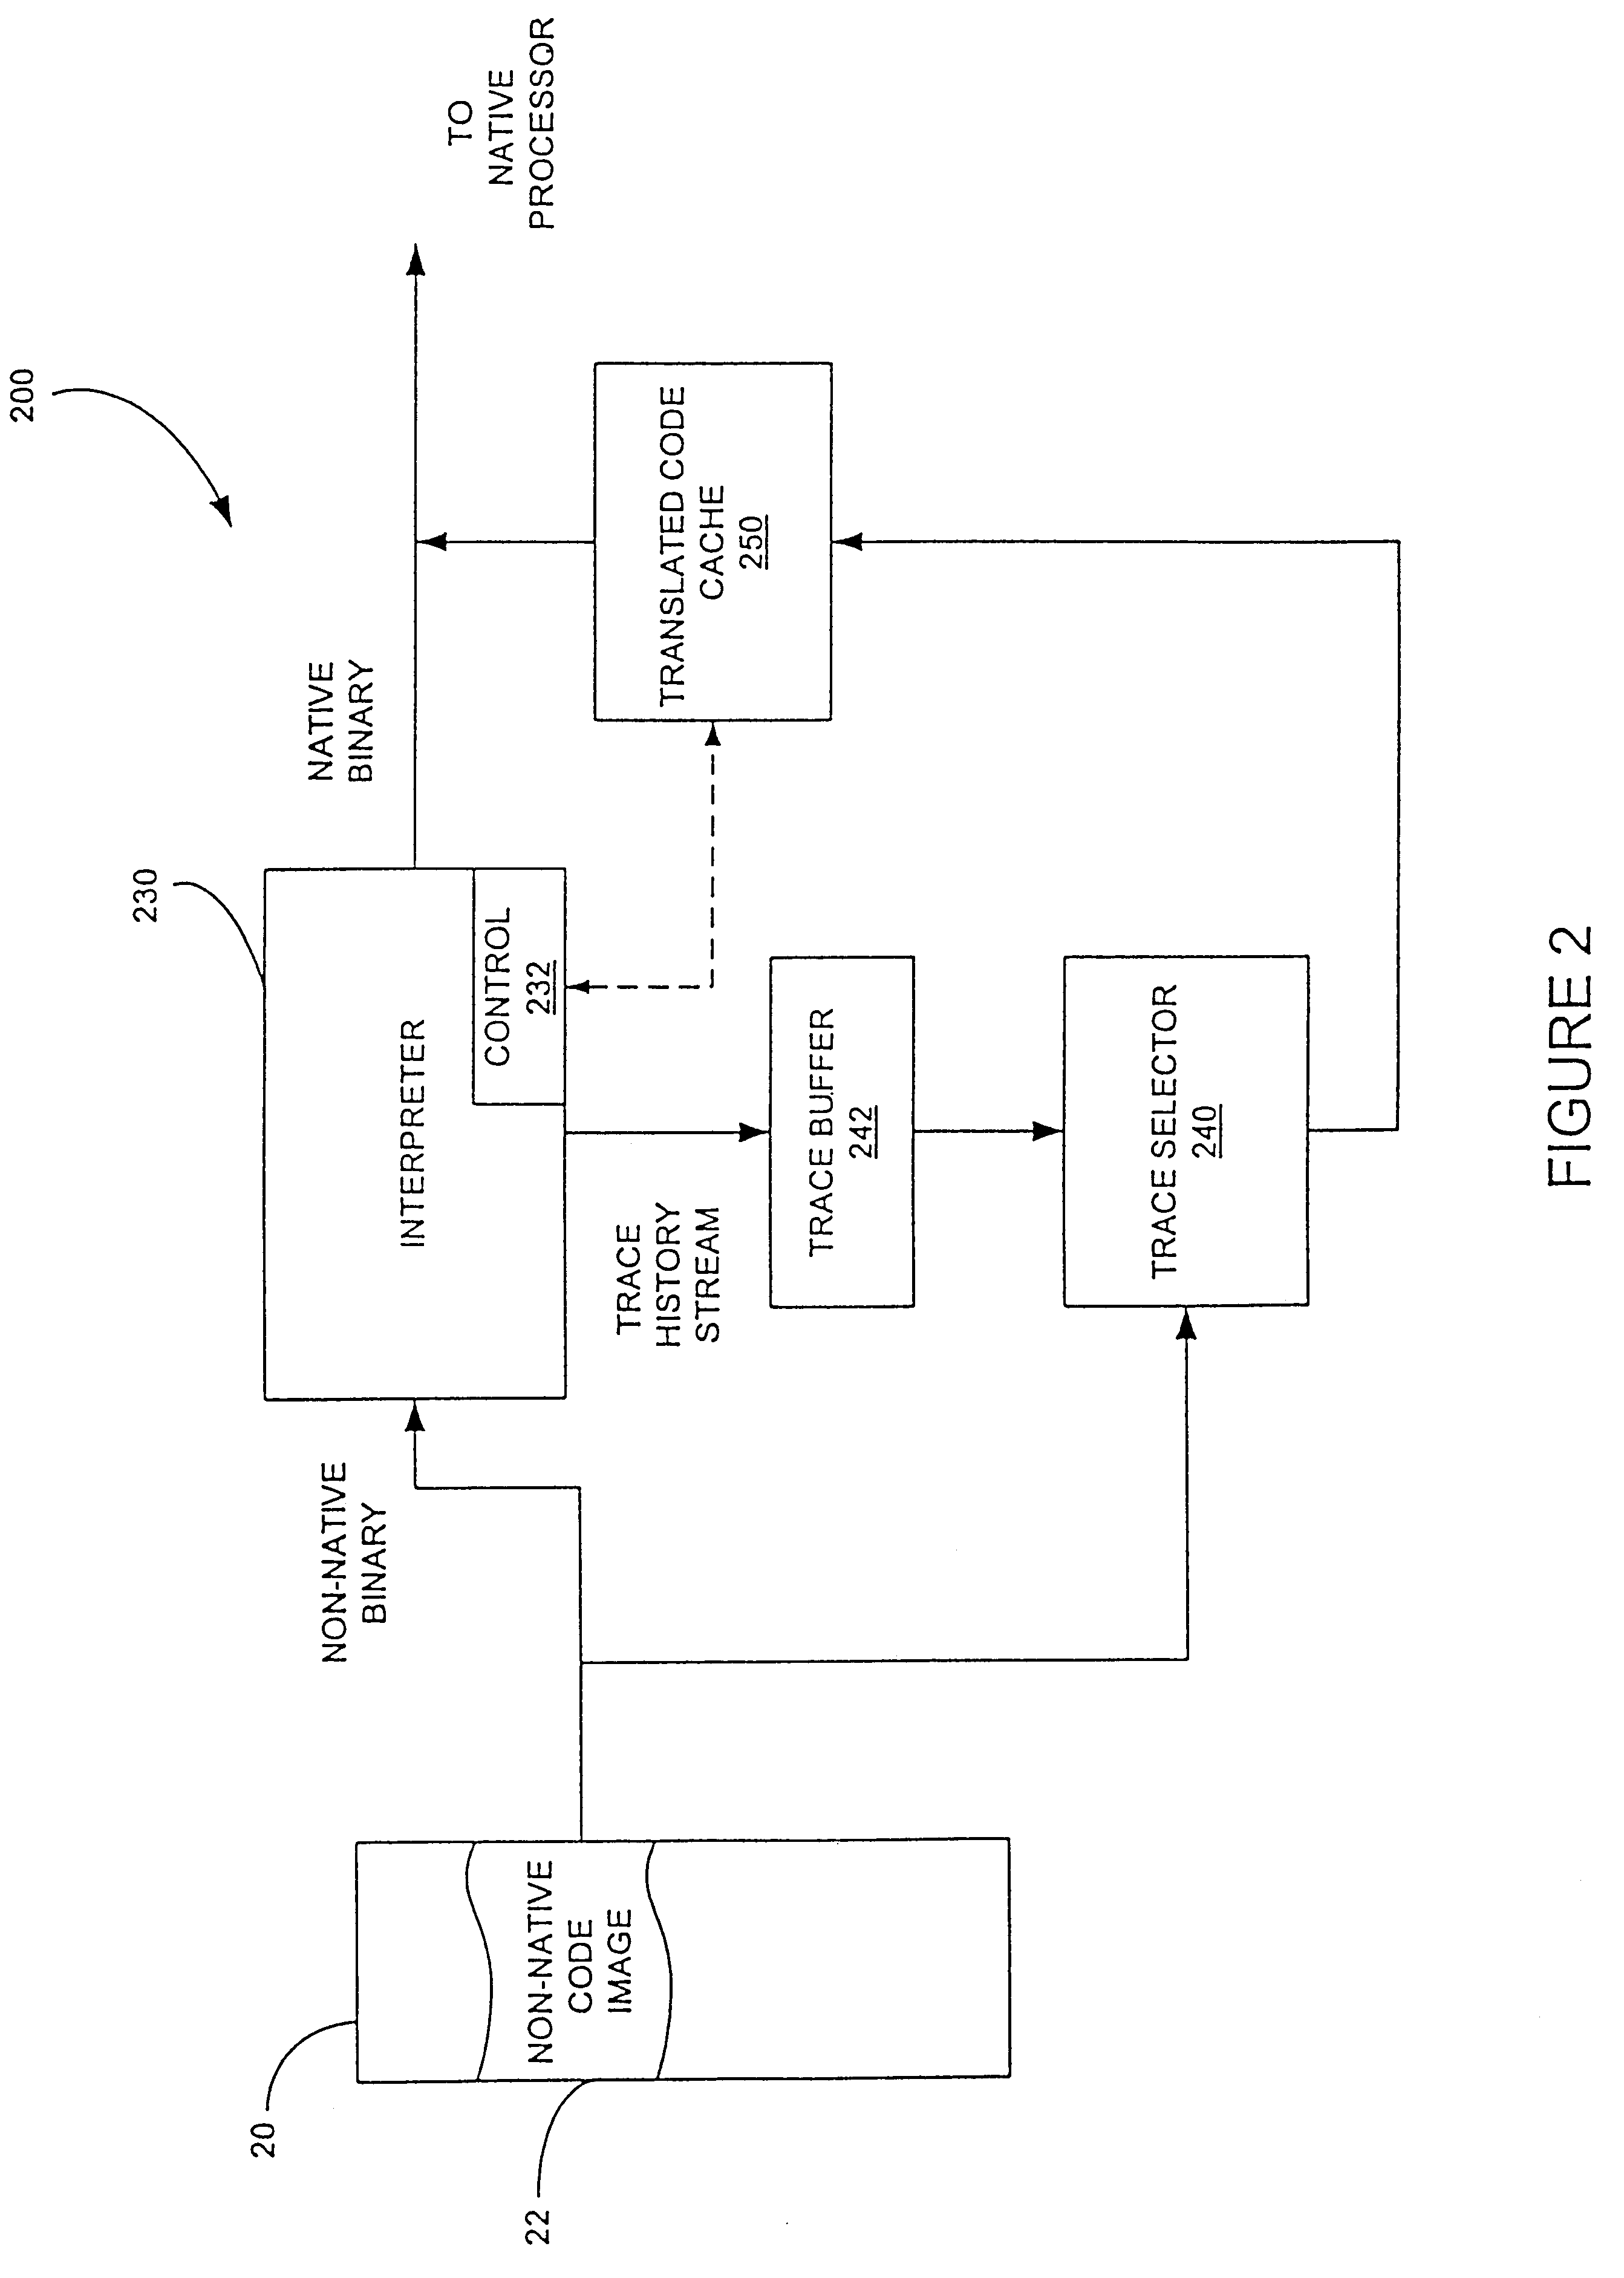 Method for selecting active code traces for translation in a caching dynamic translator